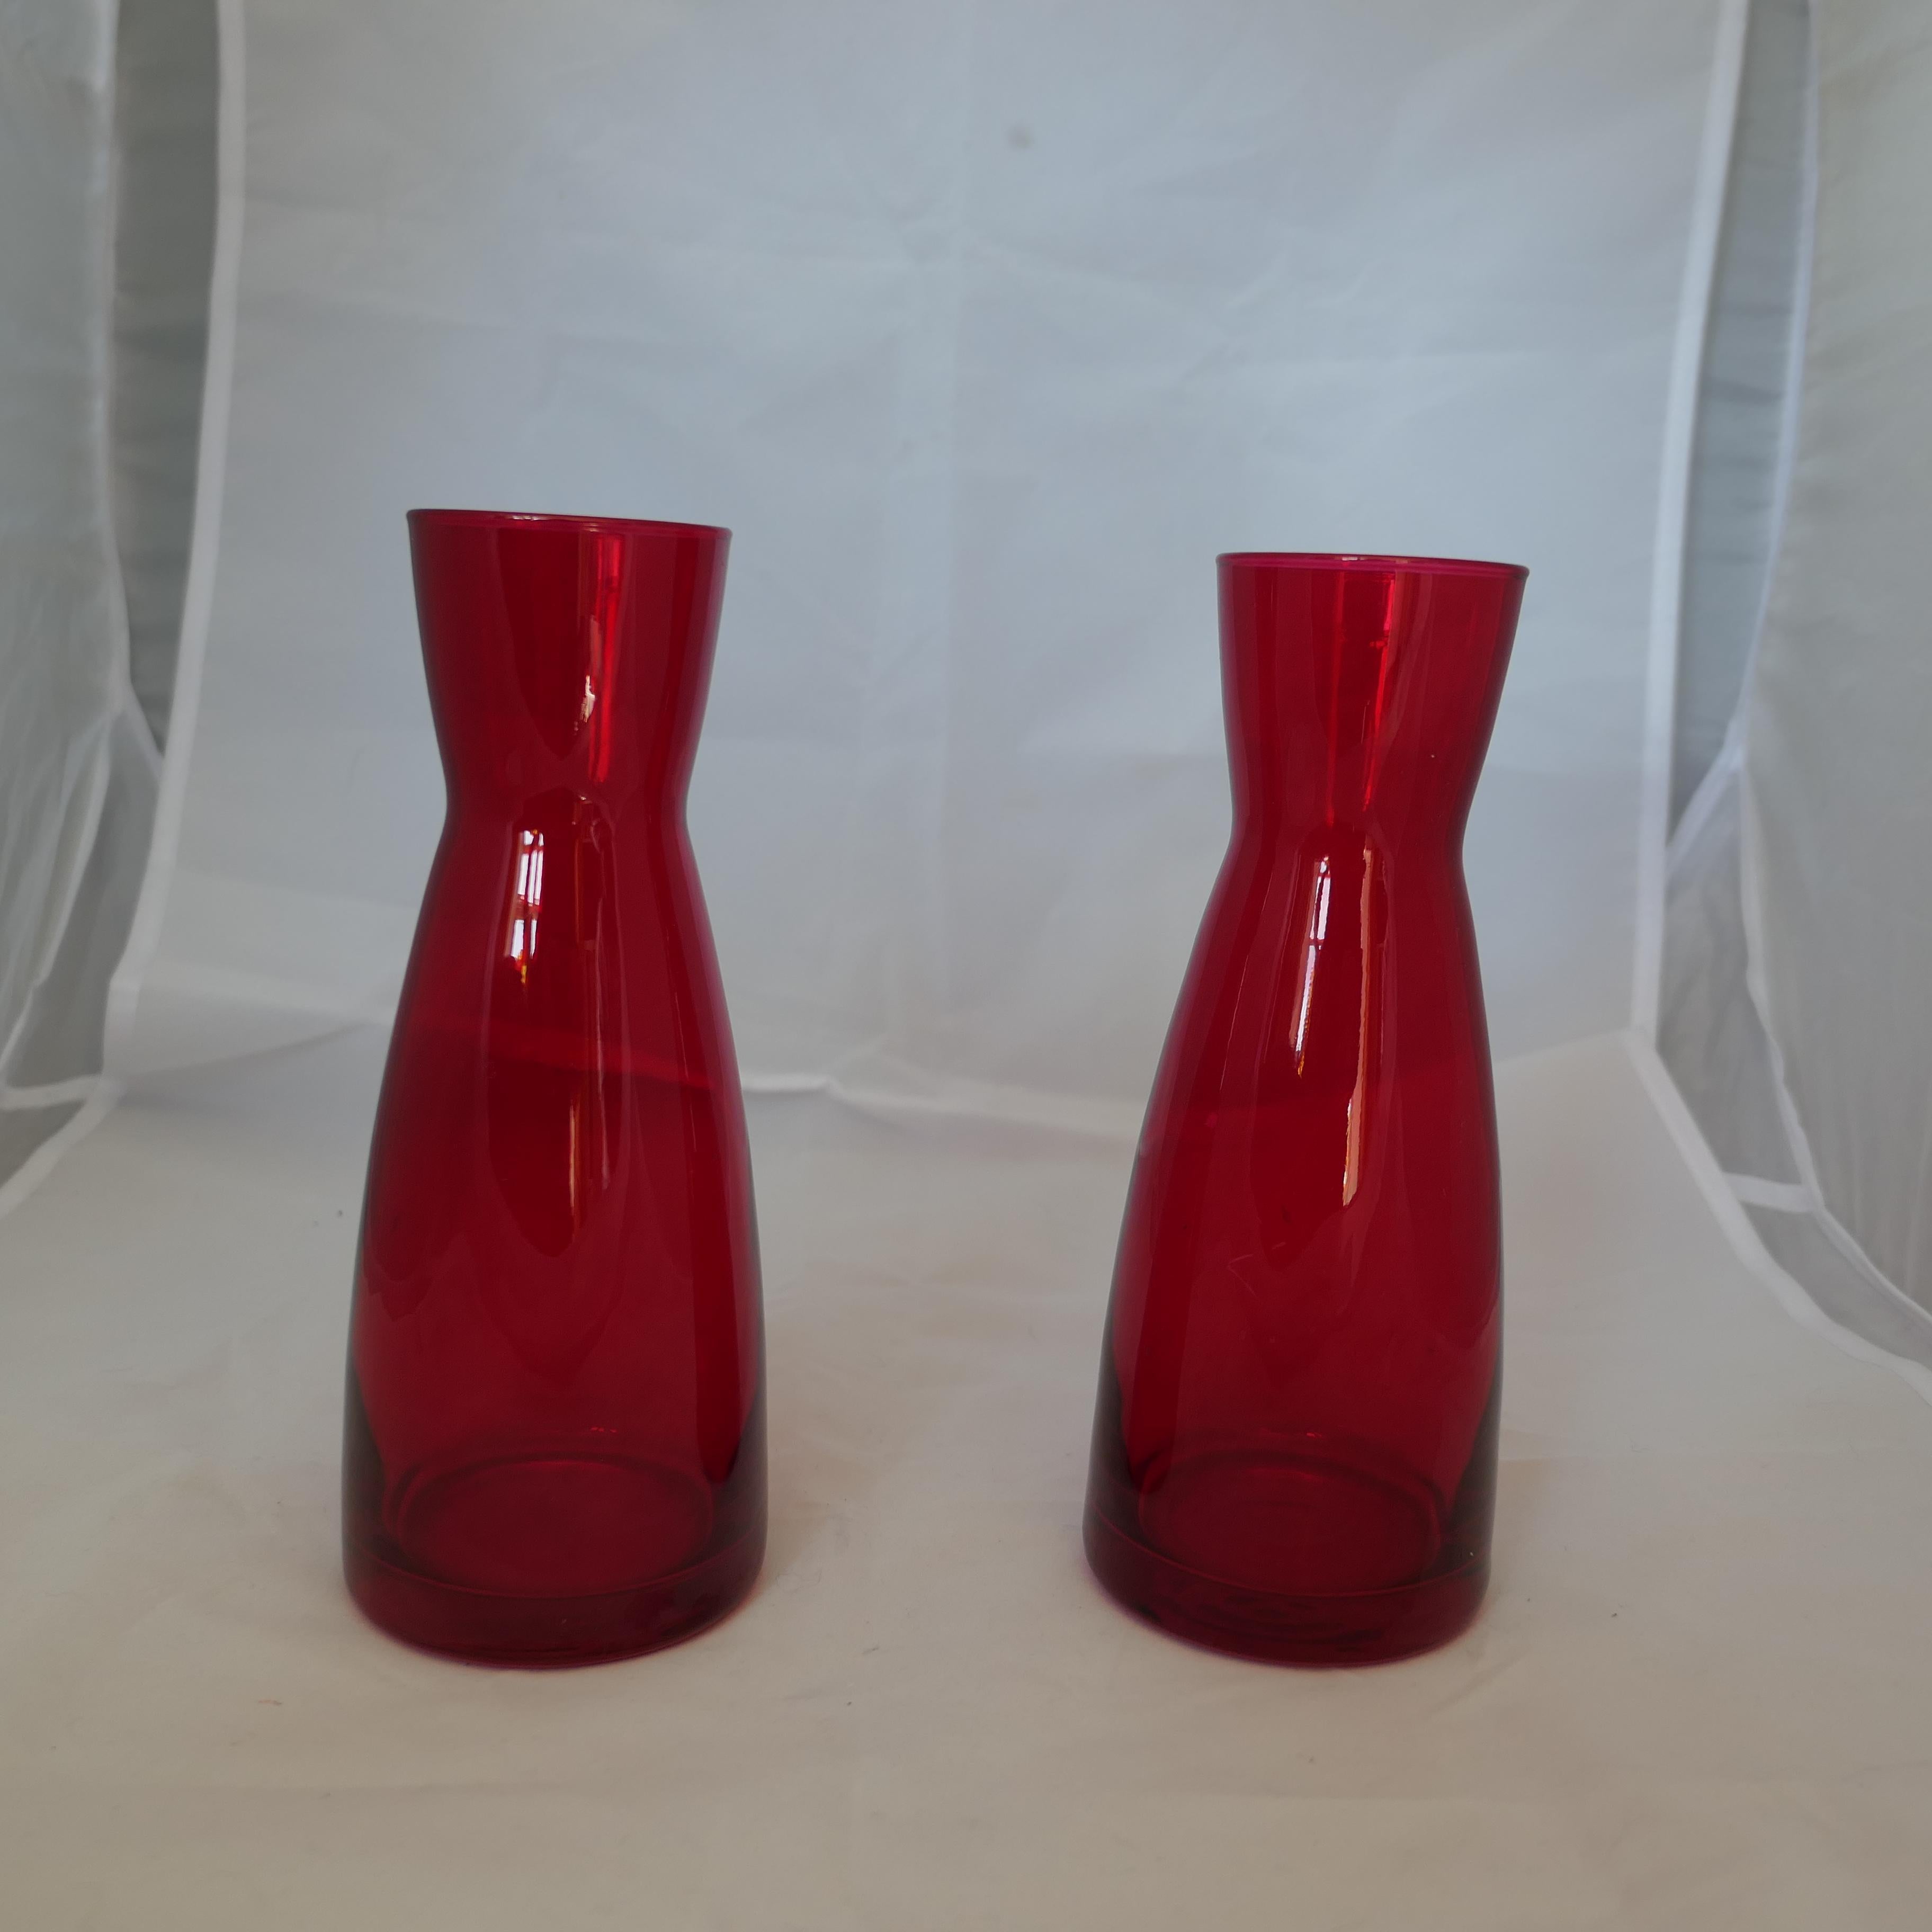 Art Glass A Pair of Ypsilon Red Glass Carafes by Bormioli Rocco     For Sale